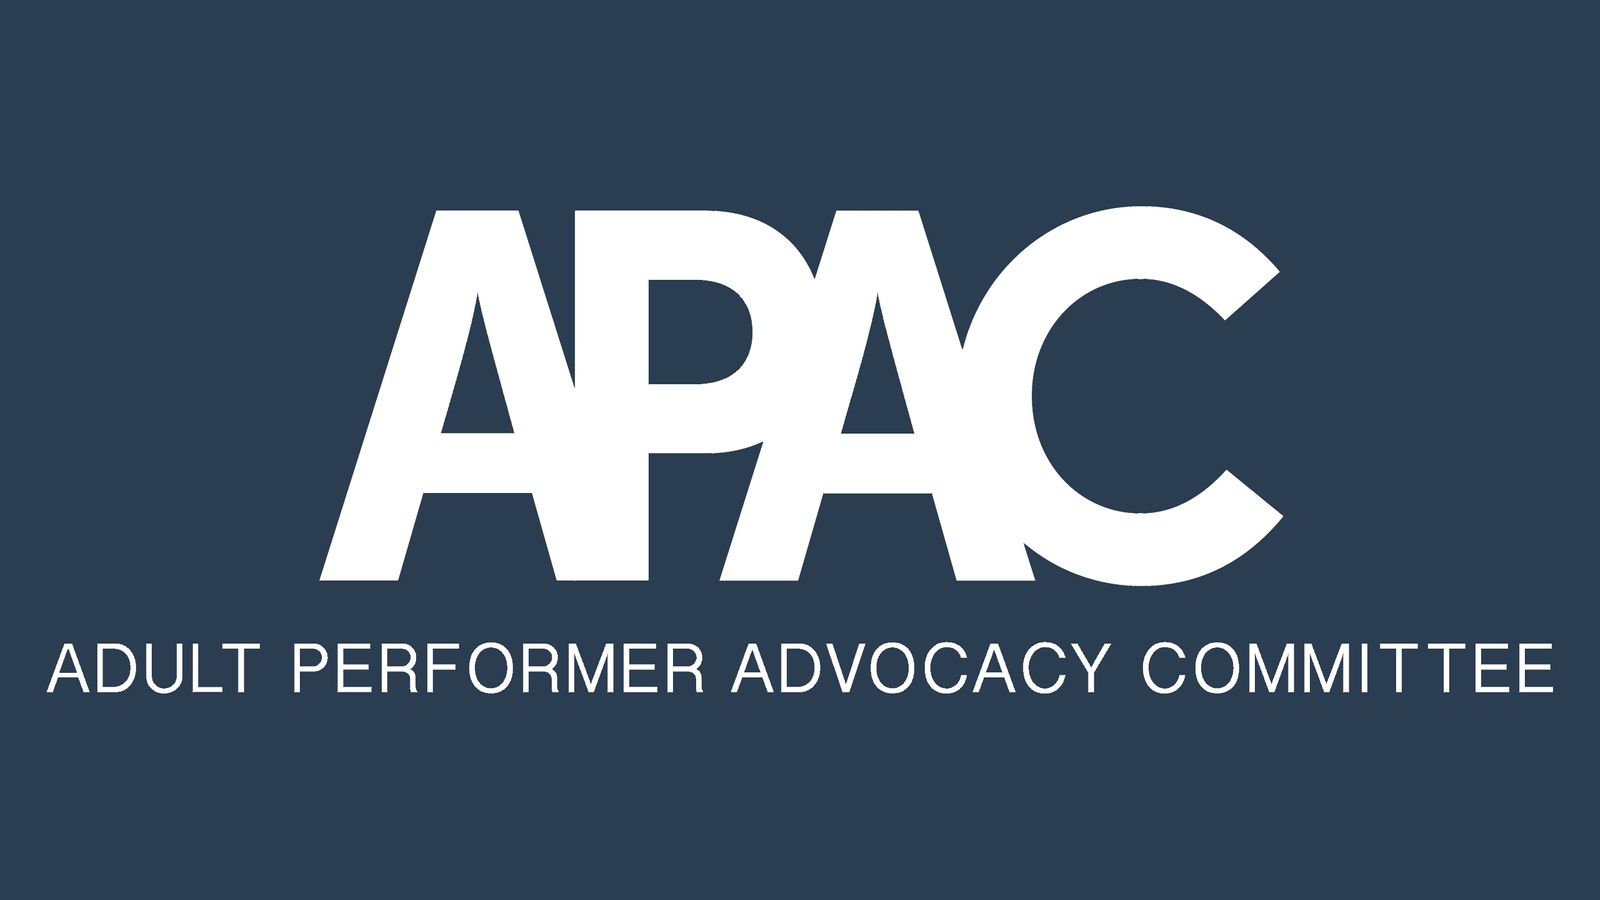 Adult Performer Advocacy Committee (APAC)